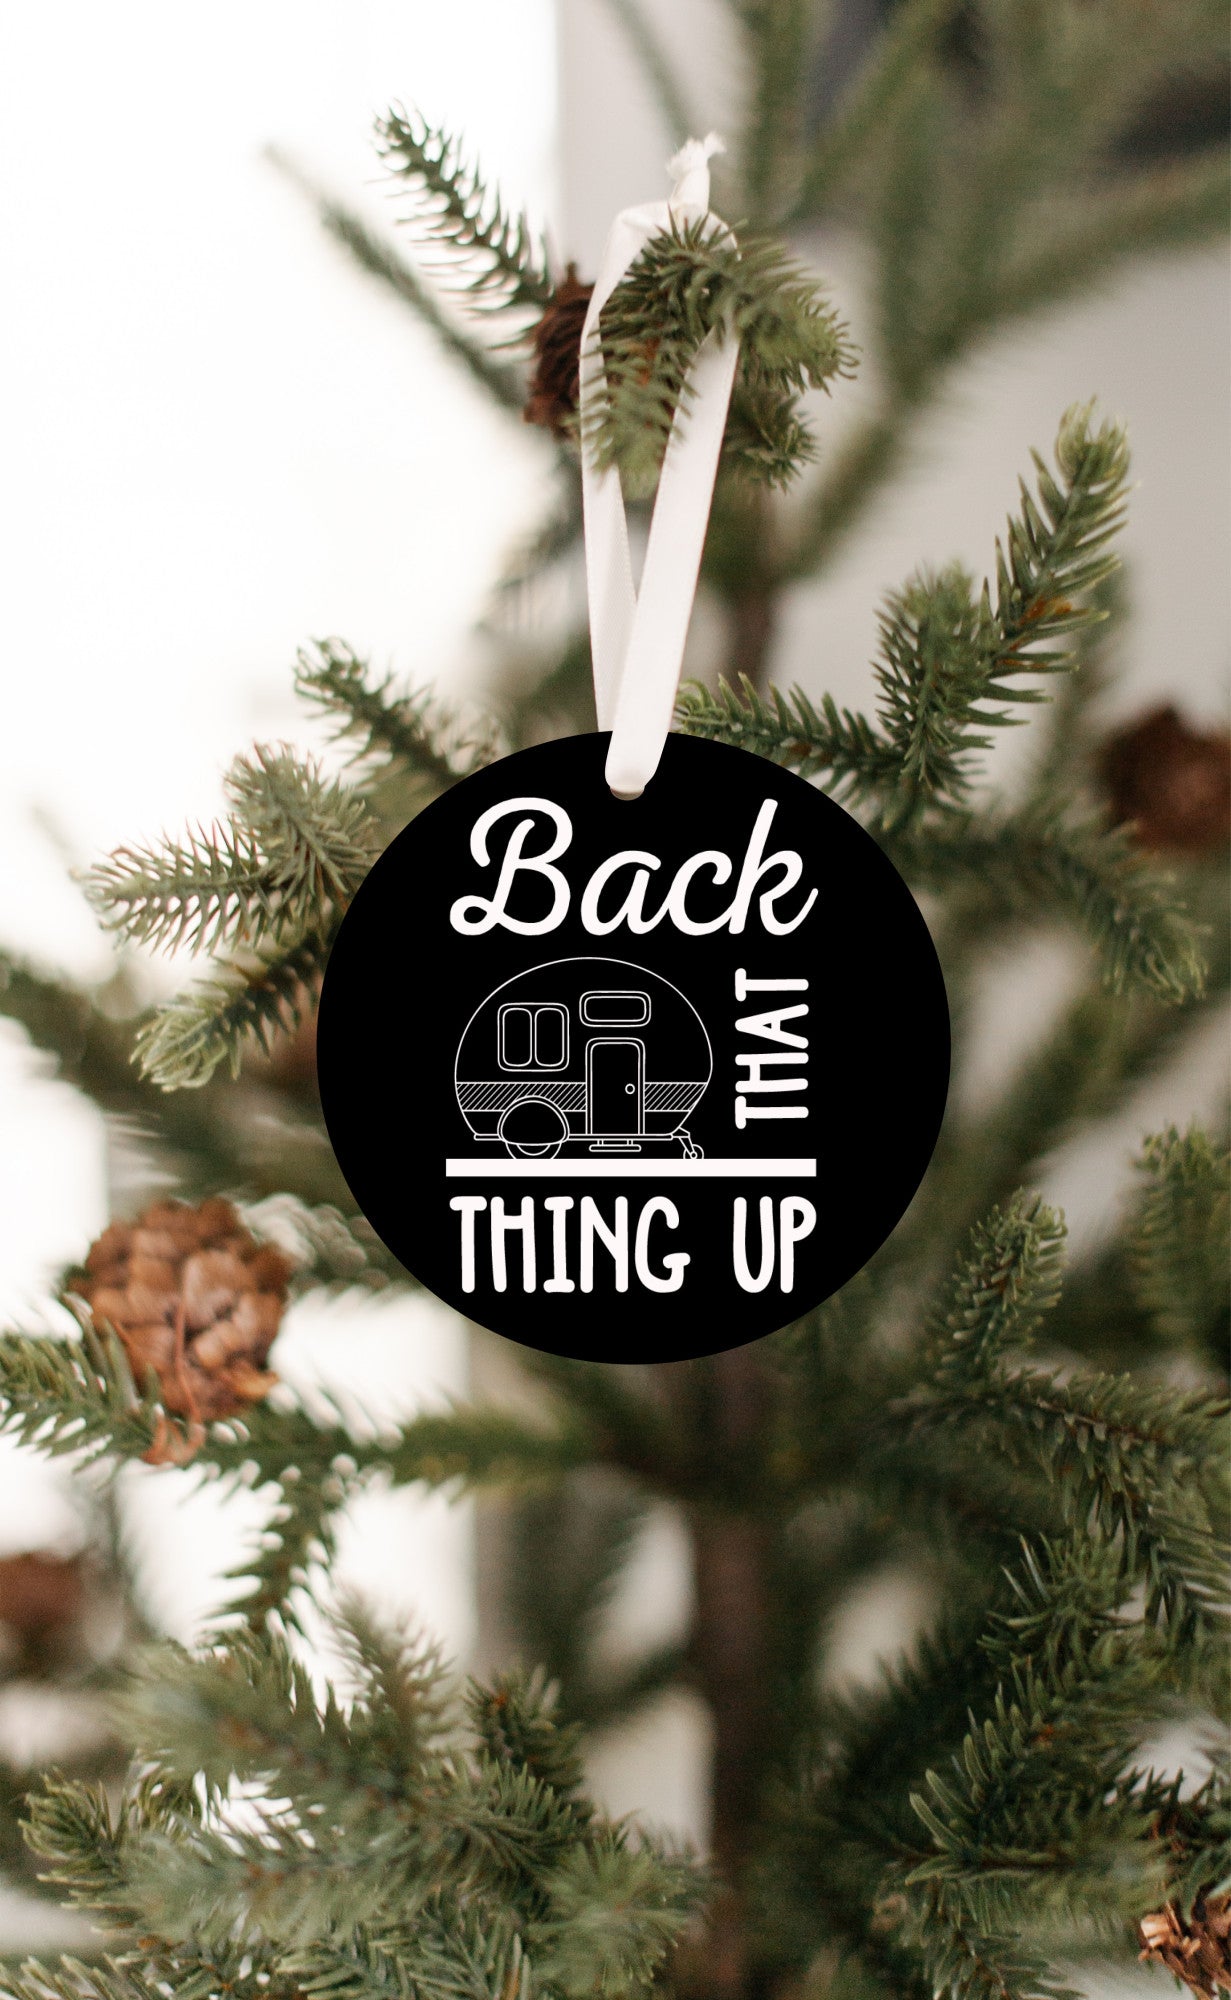 Camp Trailer; Back that thing up - Ornament